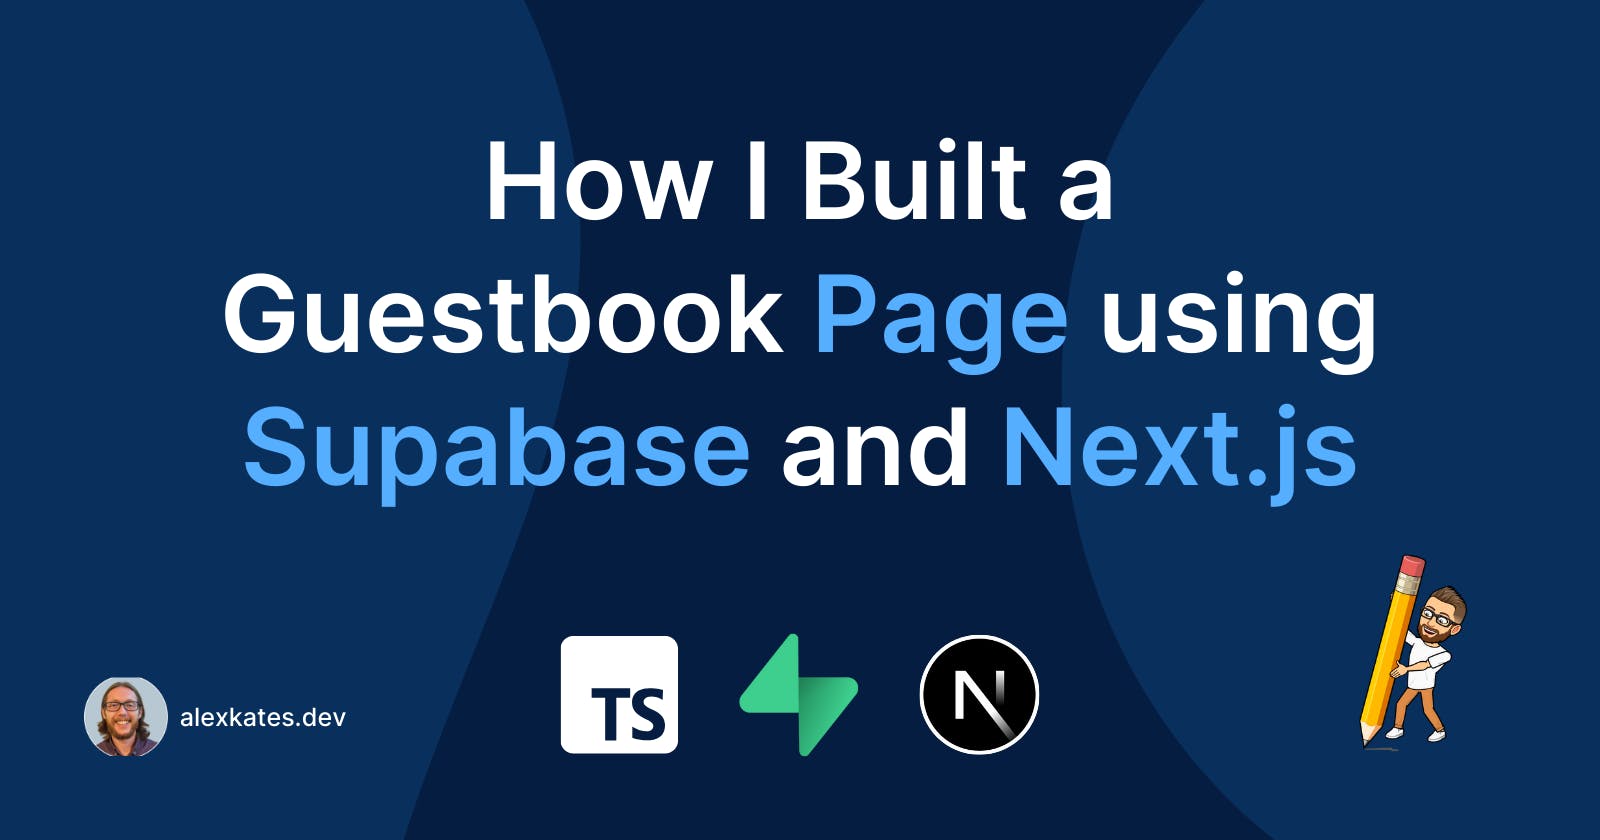 How I Built a Guestbook Page using Supabase and Next.js